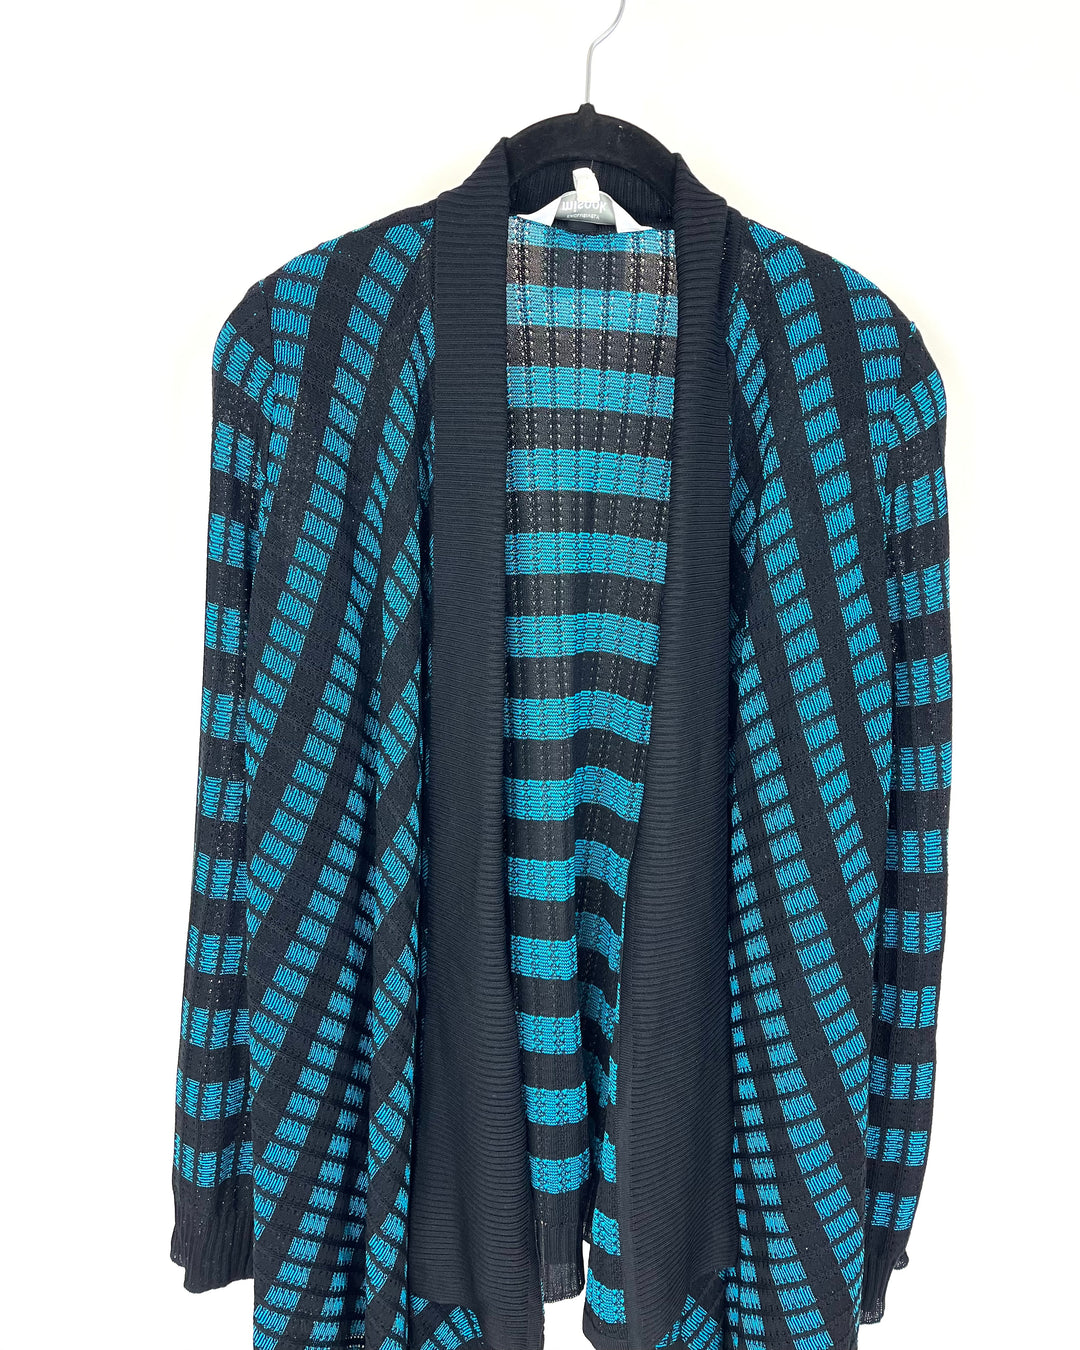 Blue And Black Sheer Knit Cardigan - Size 2-4